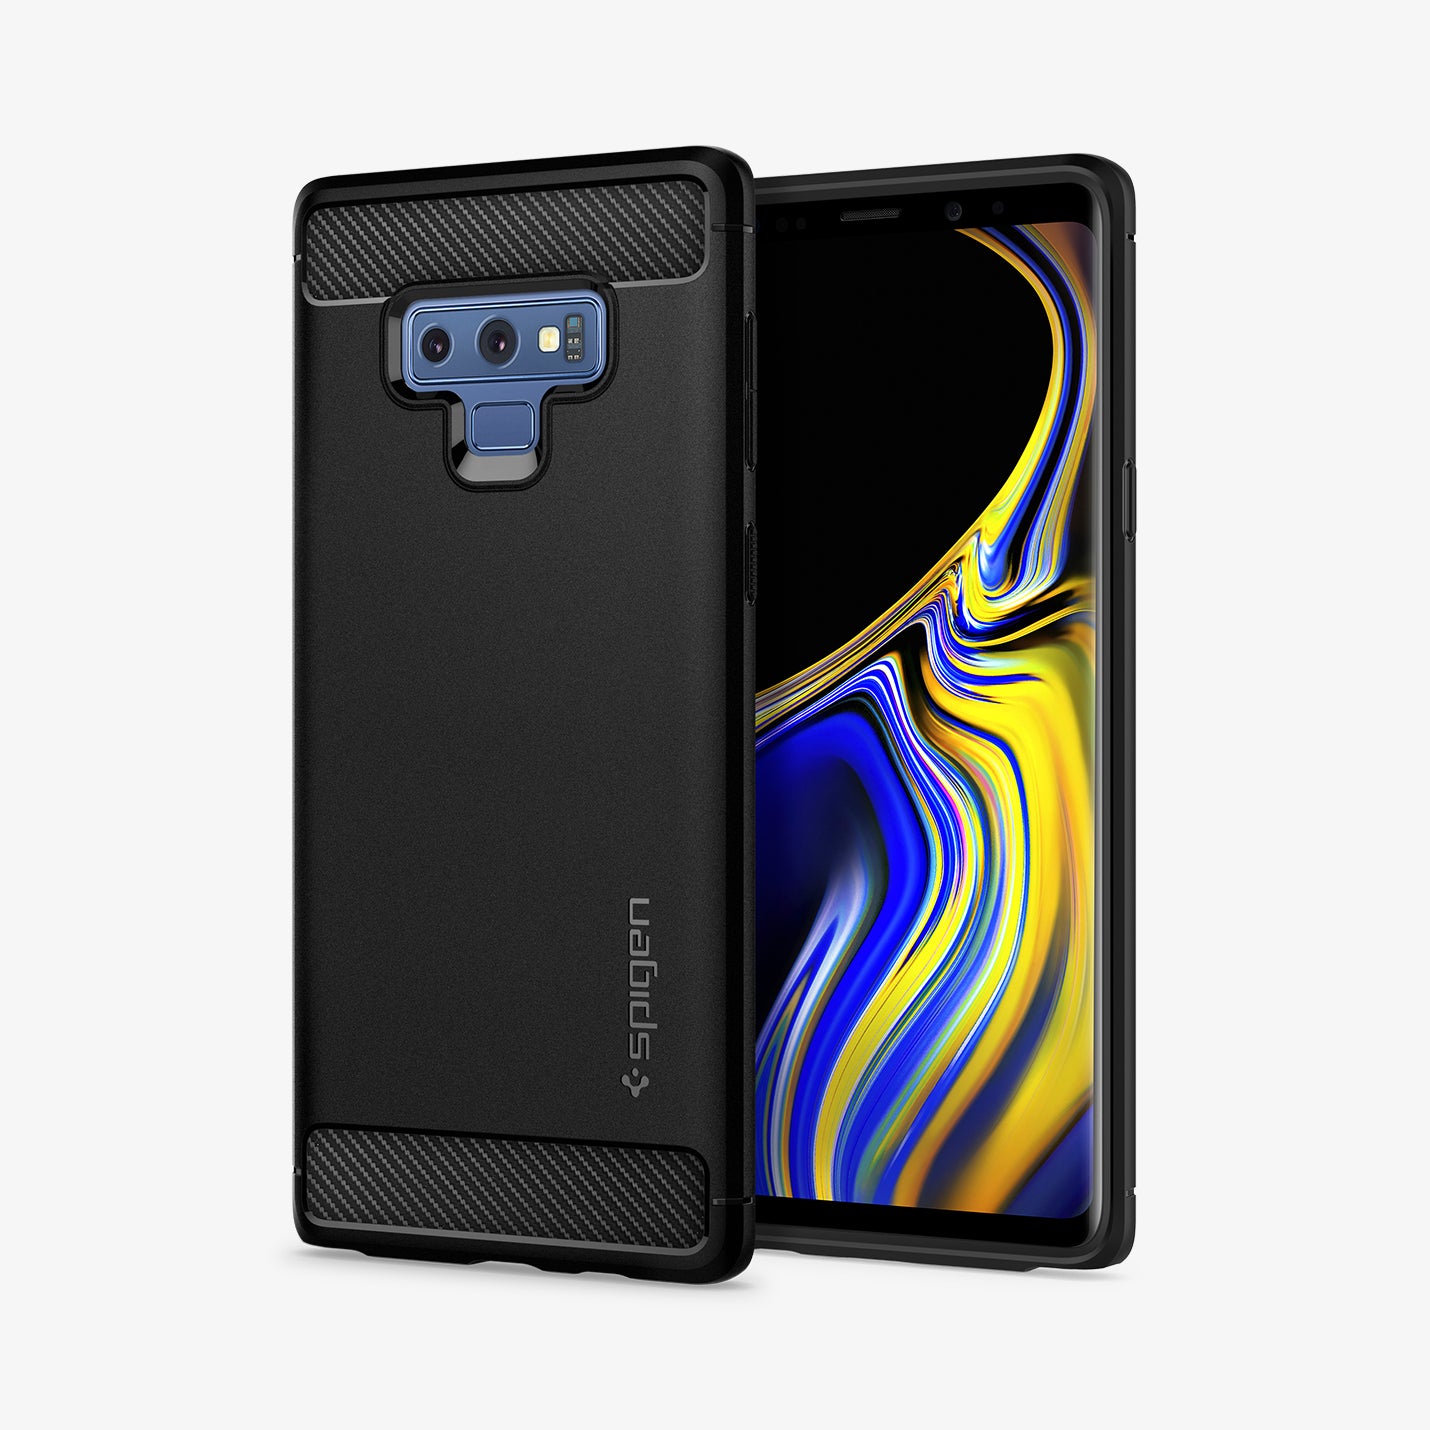 599CS24572 - Galaxy Note 9 Case Rugged Armor in matte black showing the back and front